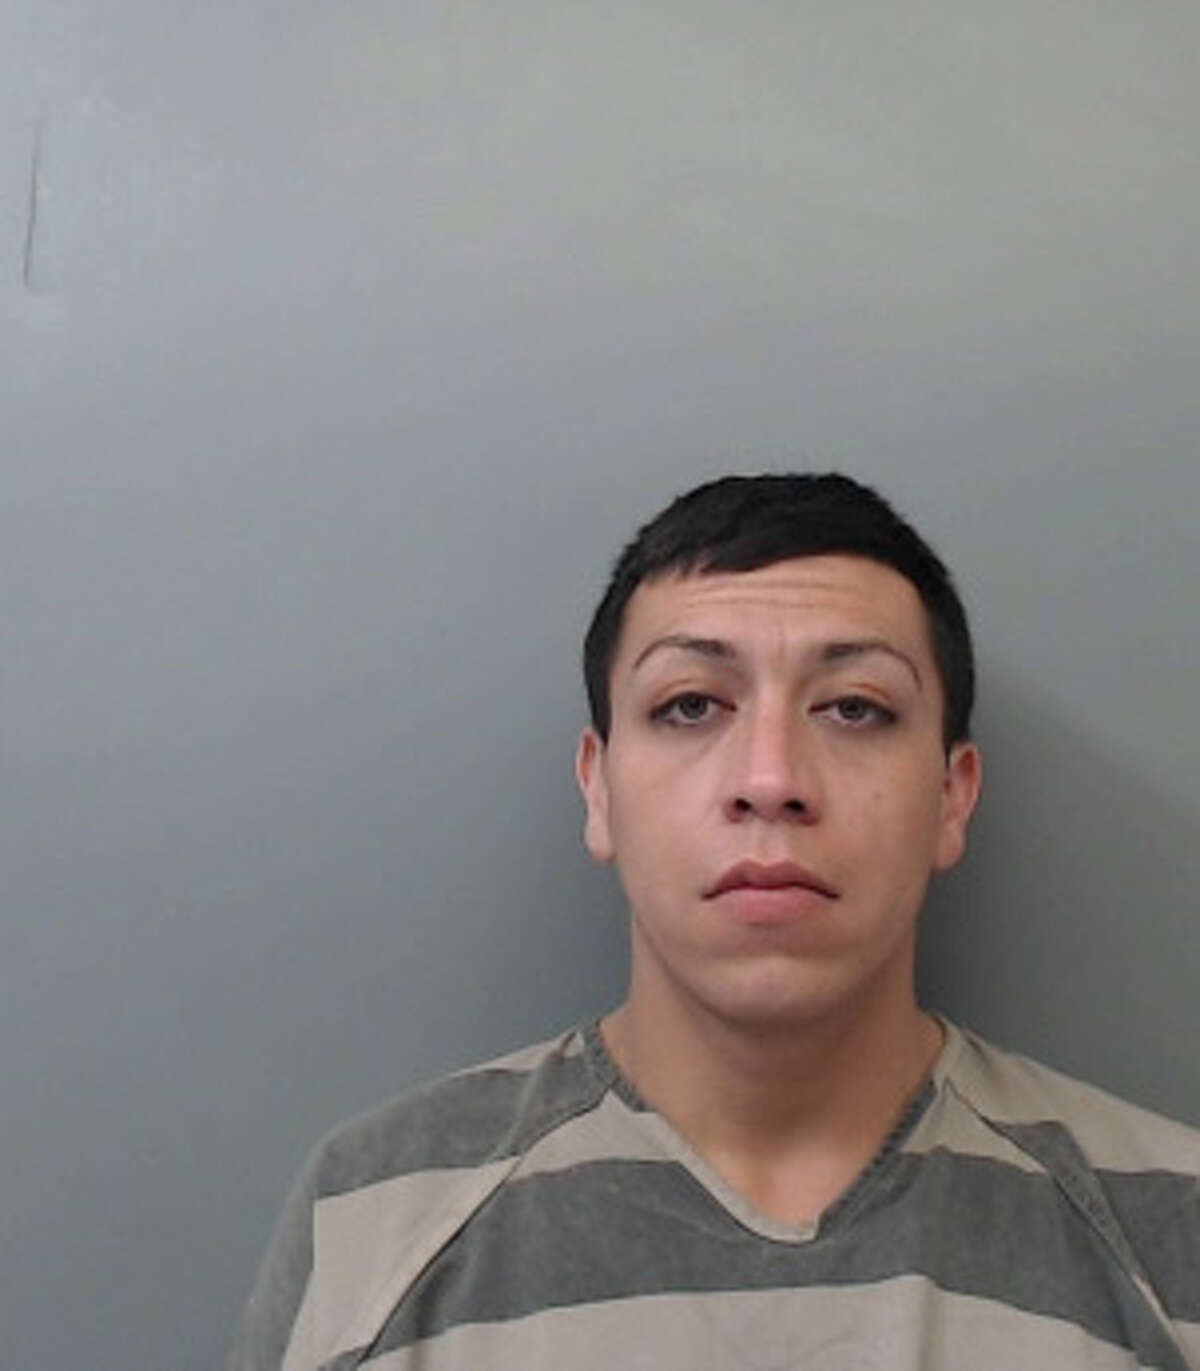 Fabian Vasquez, 28, was charged with two counts of possession of a controlled substance.